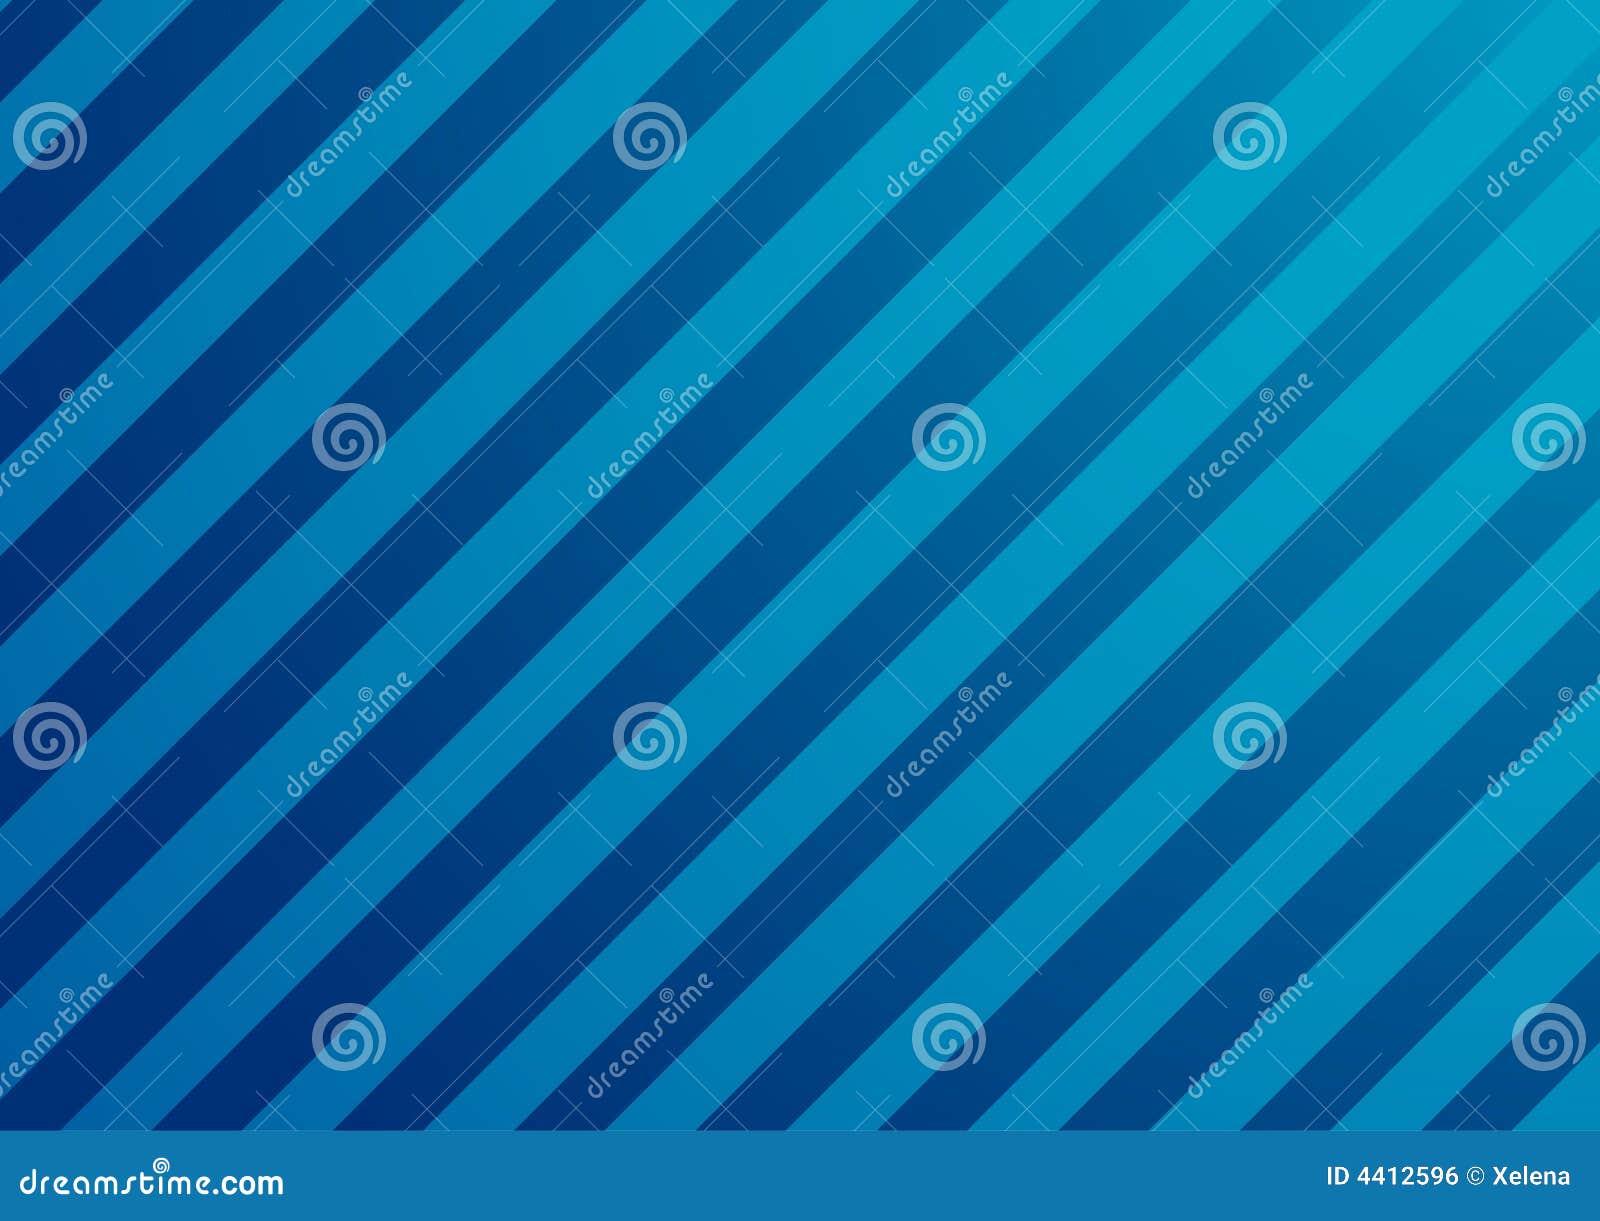 Blue vector background stock vector. Illustration of effect - 4412596